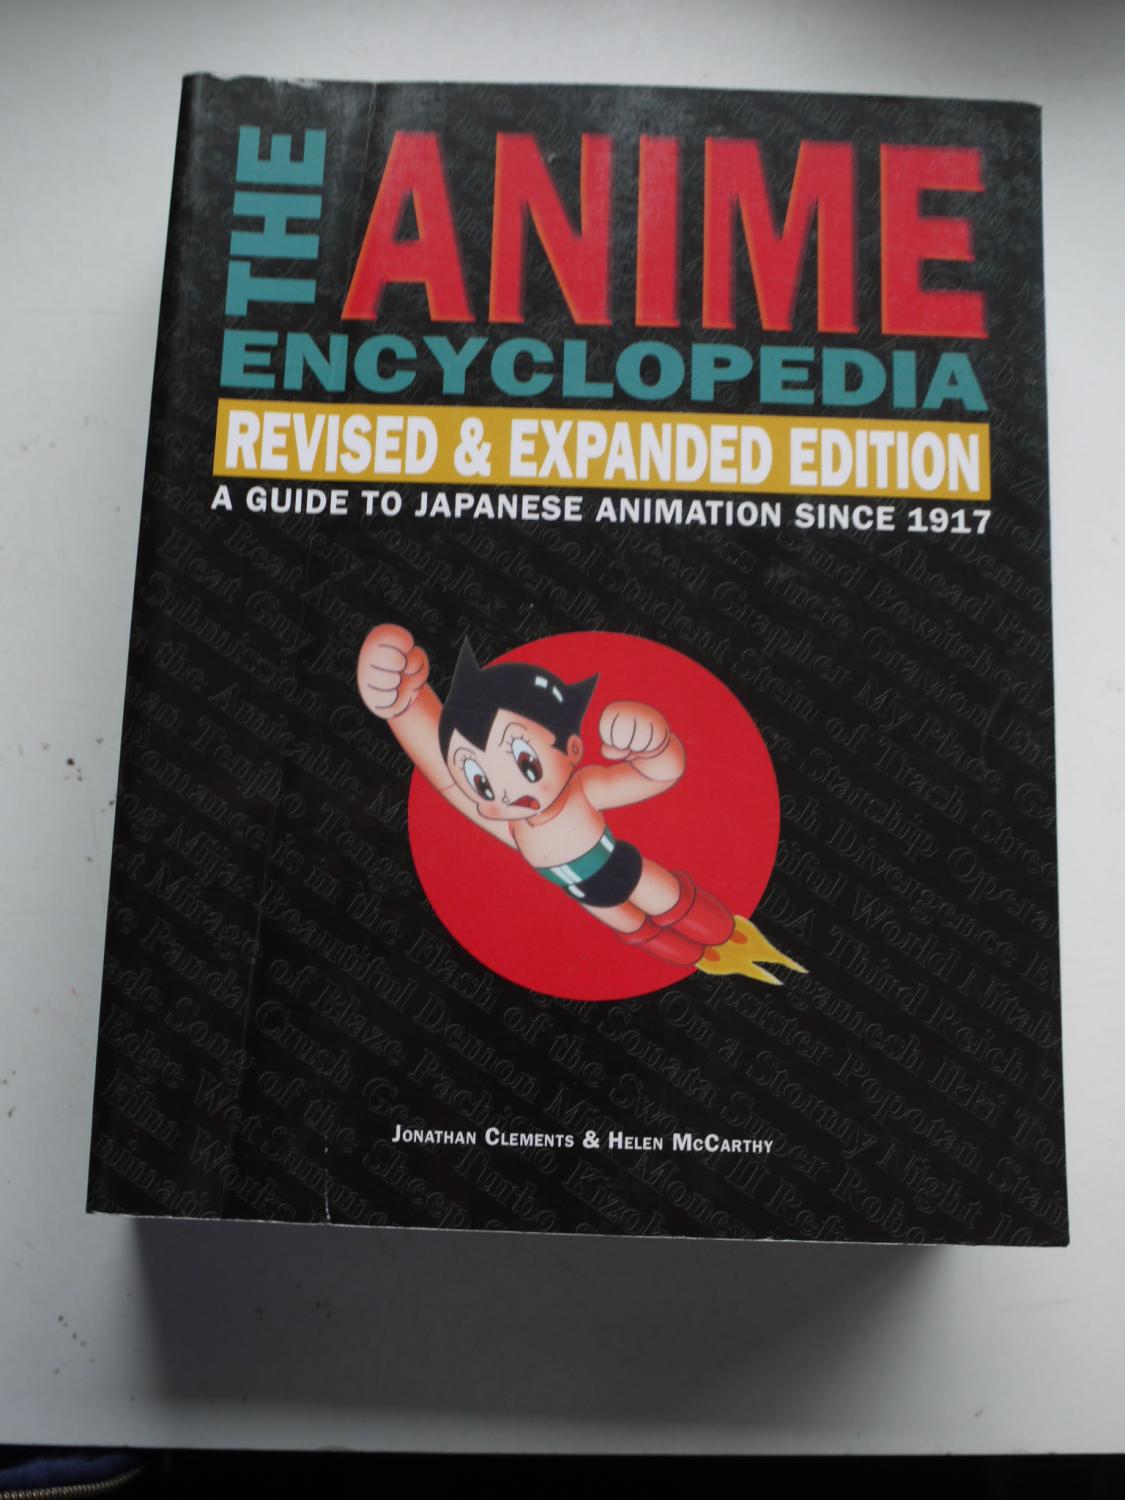 THE ANIME ENCYCLOPEDIA A Guide to Japanese Animation since 1917. Revised and Expanded Edition - JONATHAN CLEMENTS & HELEN McCARTHY